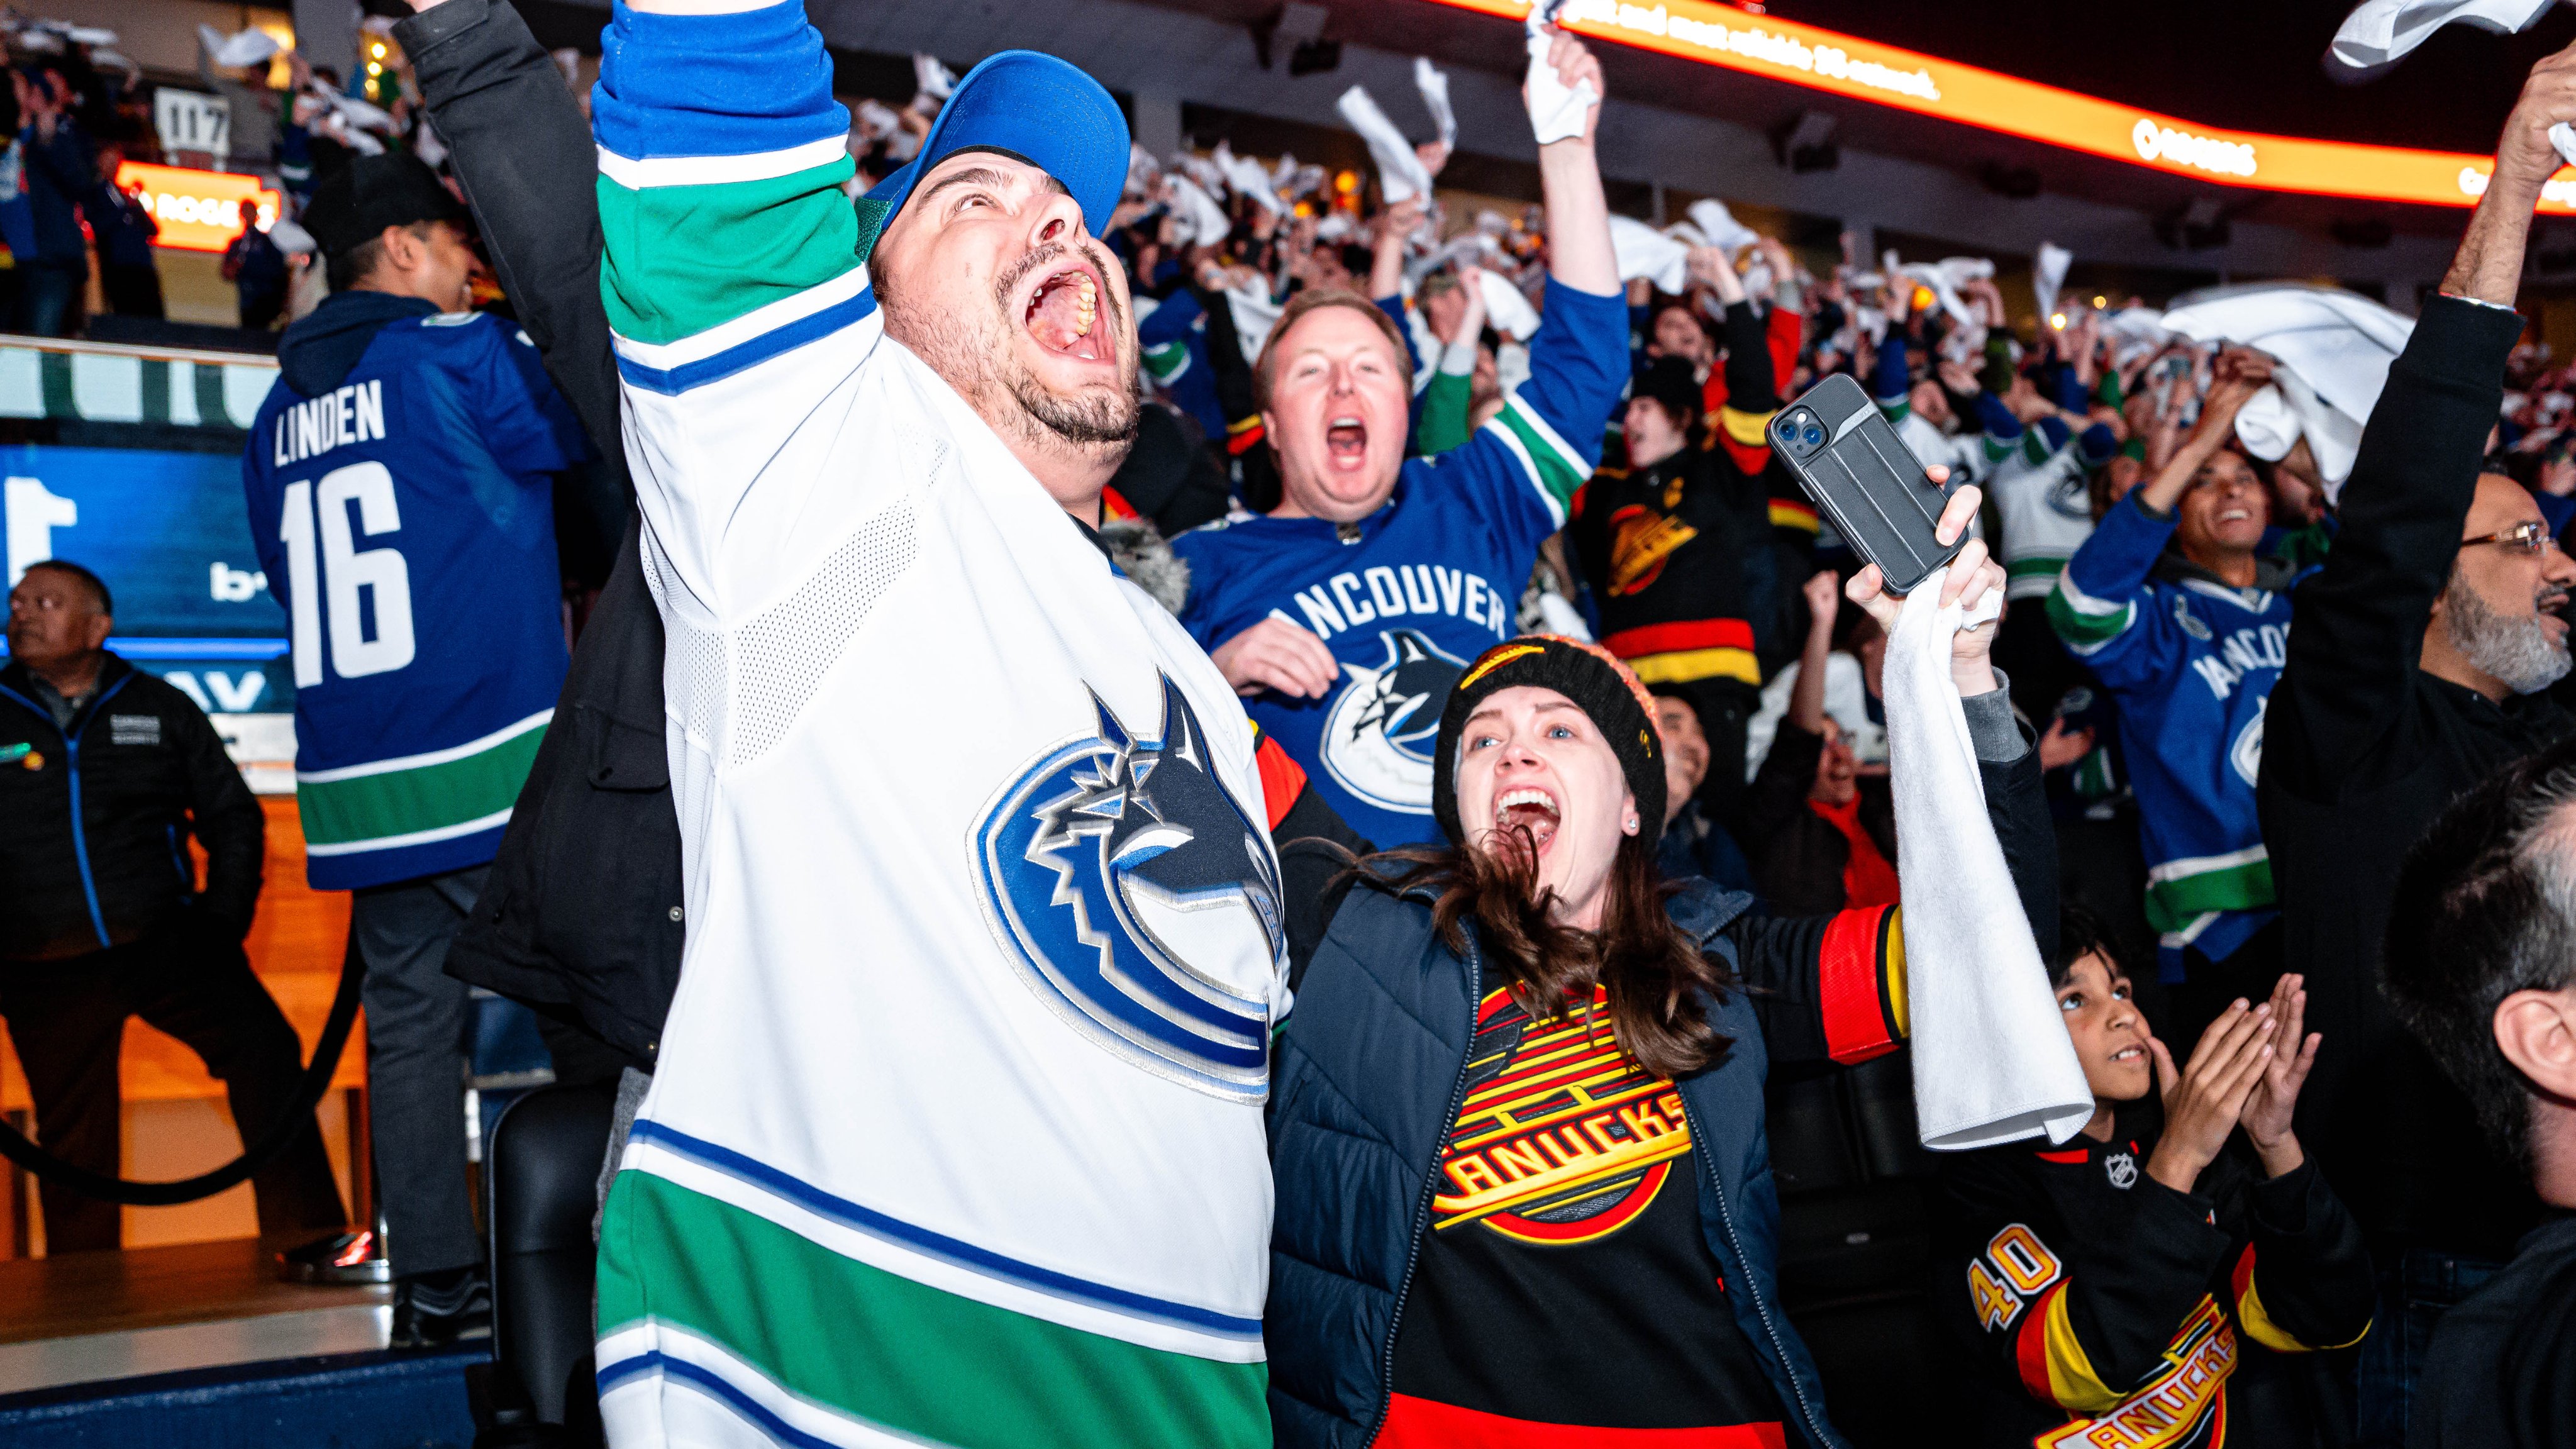 Vancouver Canucks’ Game 6 viewing party sold out -